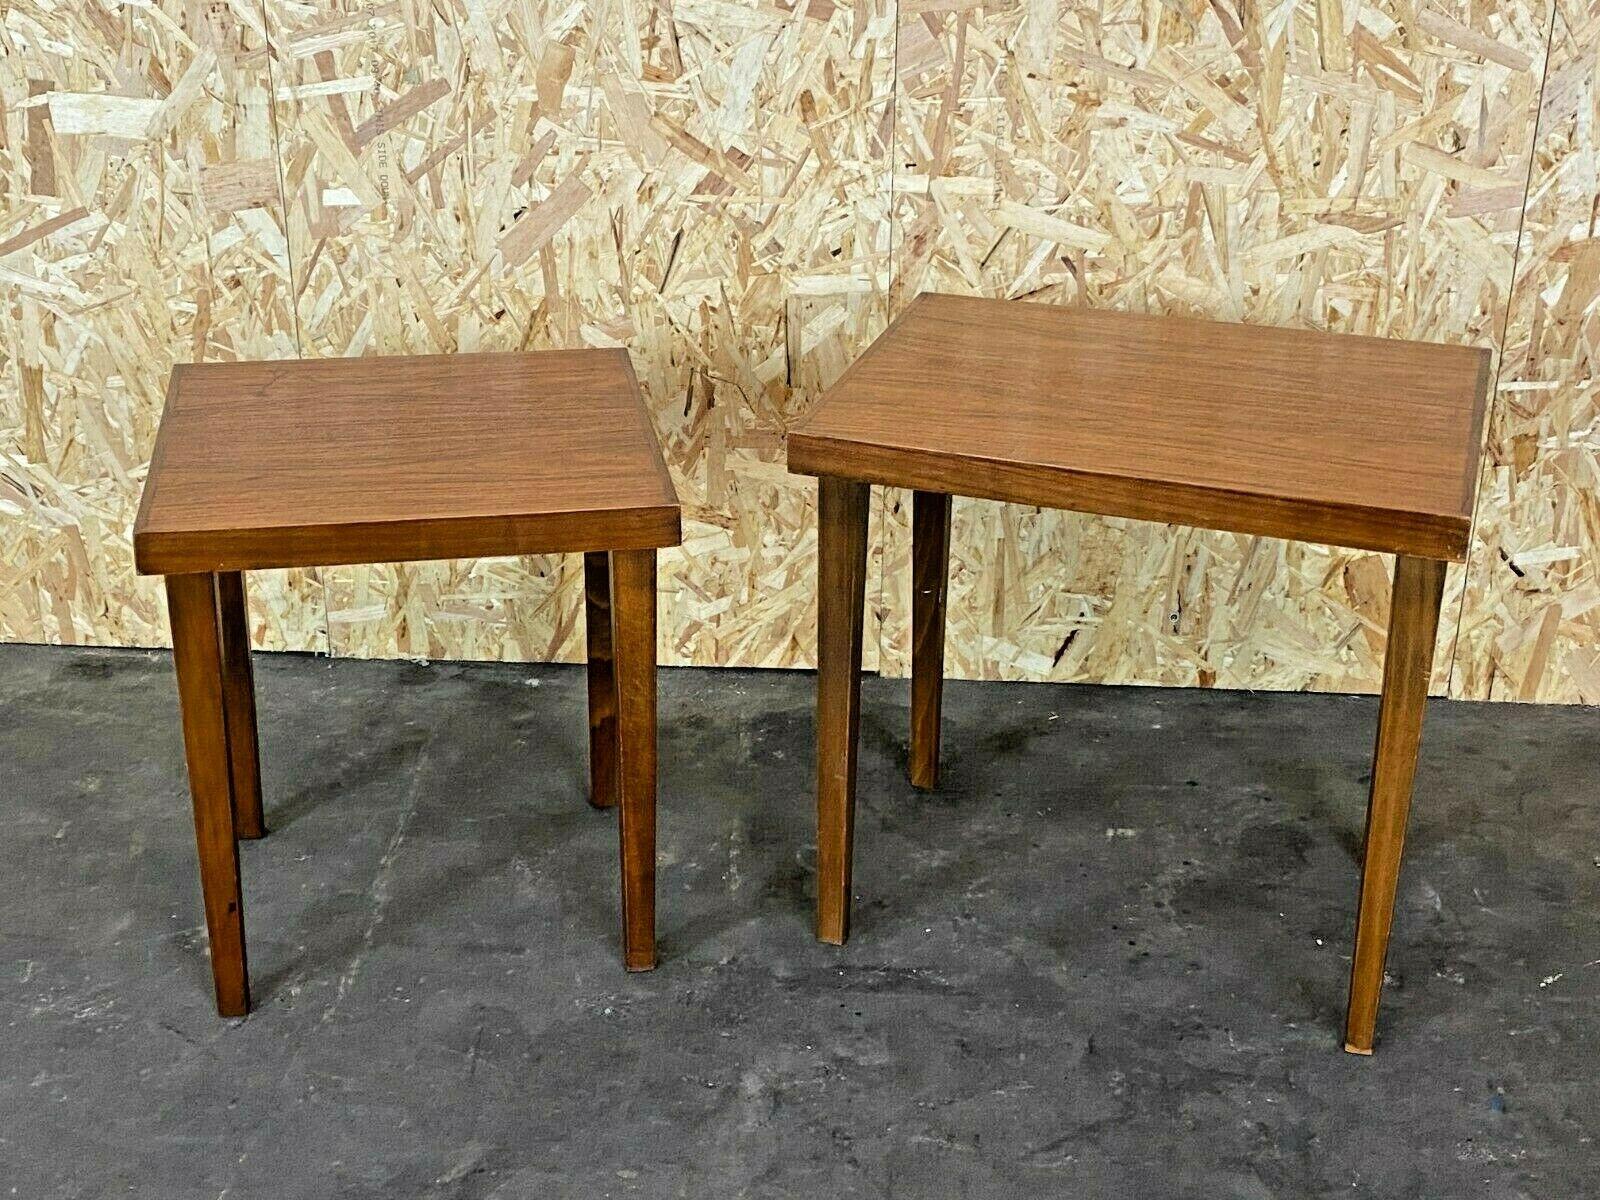 2x 60s 70s side table Danish modern design 60s 70s

Object: 2x side table

Manufacturer:

Condition: good

Age: around 1960-1970

Dimensions:

52cm x 40cm x 51cm
41cm x 38cm x 47cm

Other notes:

The pictures serve as part of the